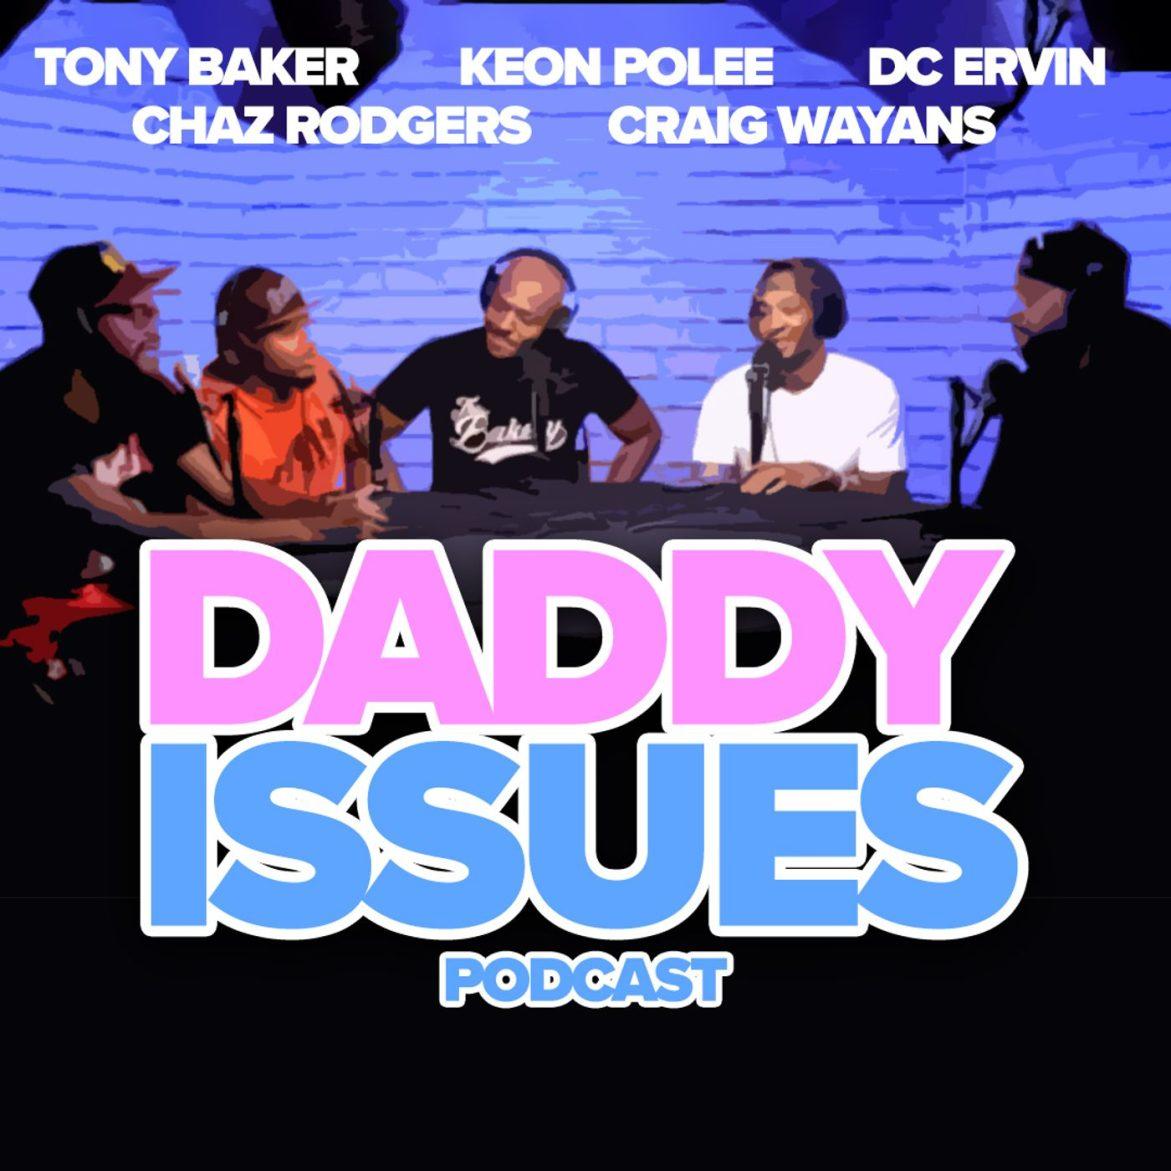 Black Podcasting - Daddy Issues: Spending & Eating Habits